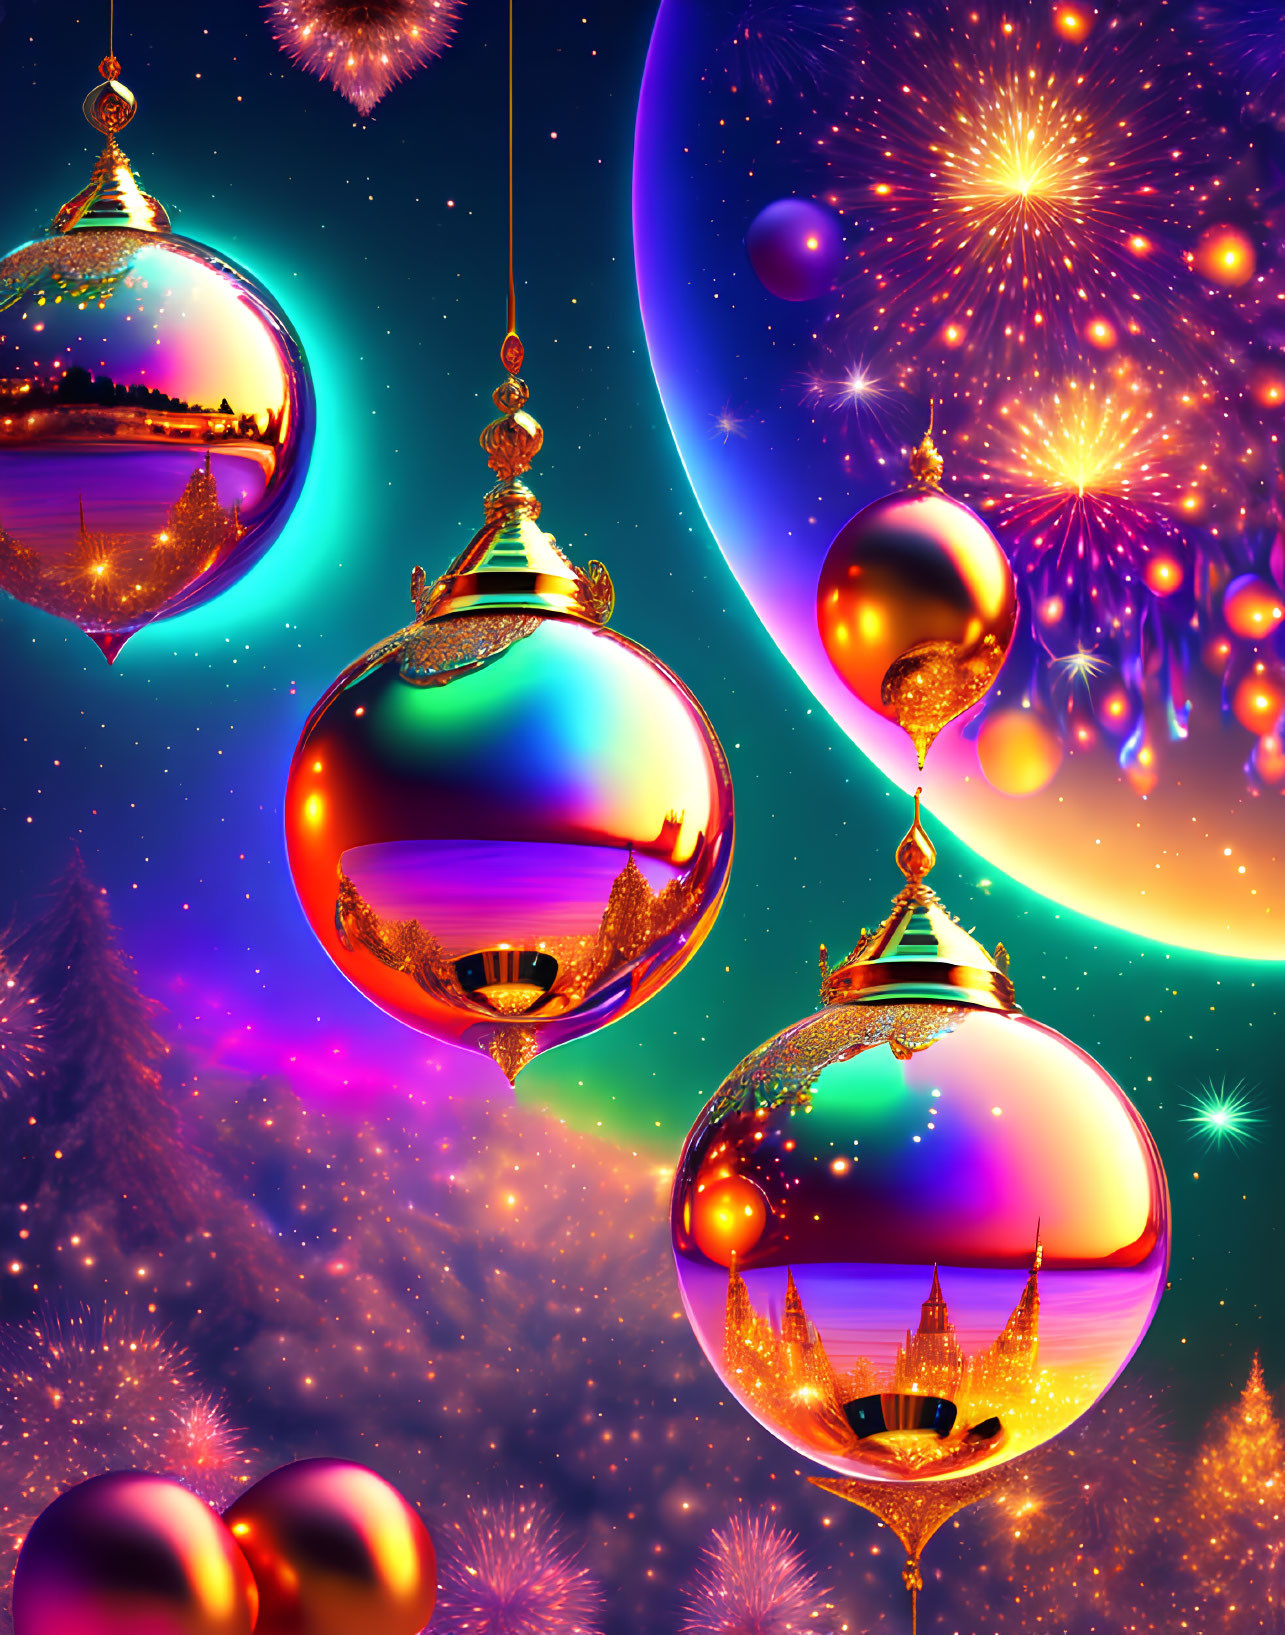 Colorful Christmas Ornaments Reflect Starry Sky and Fireworks